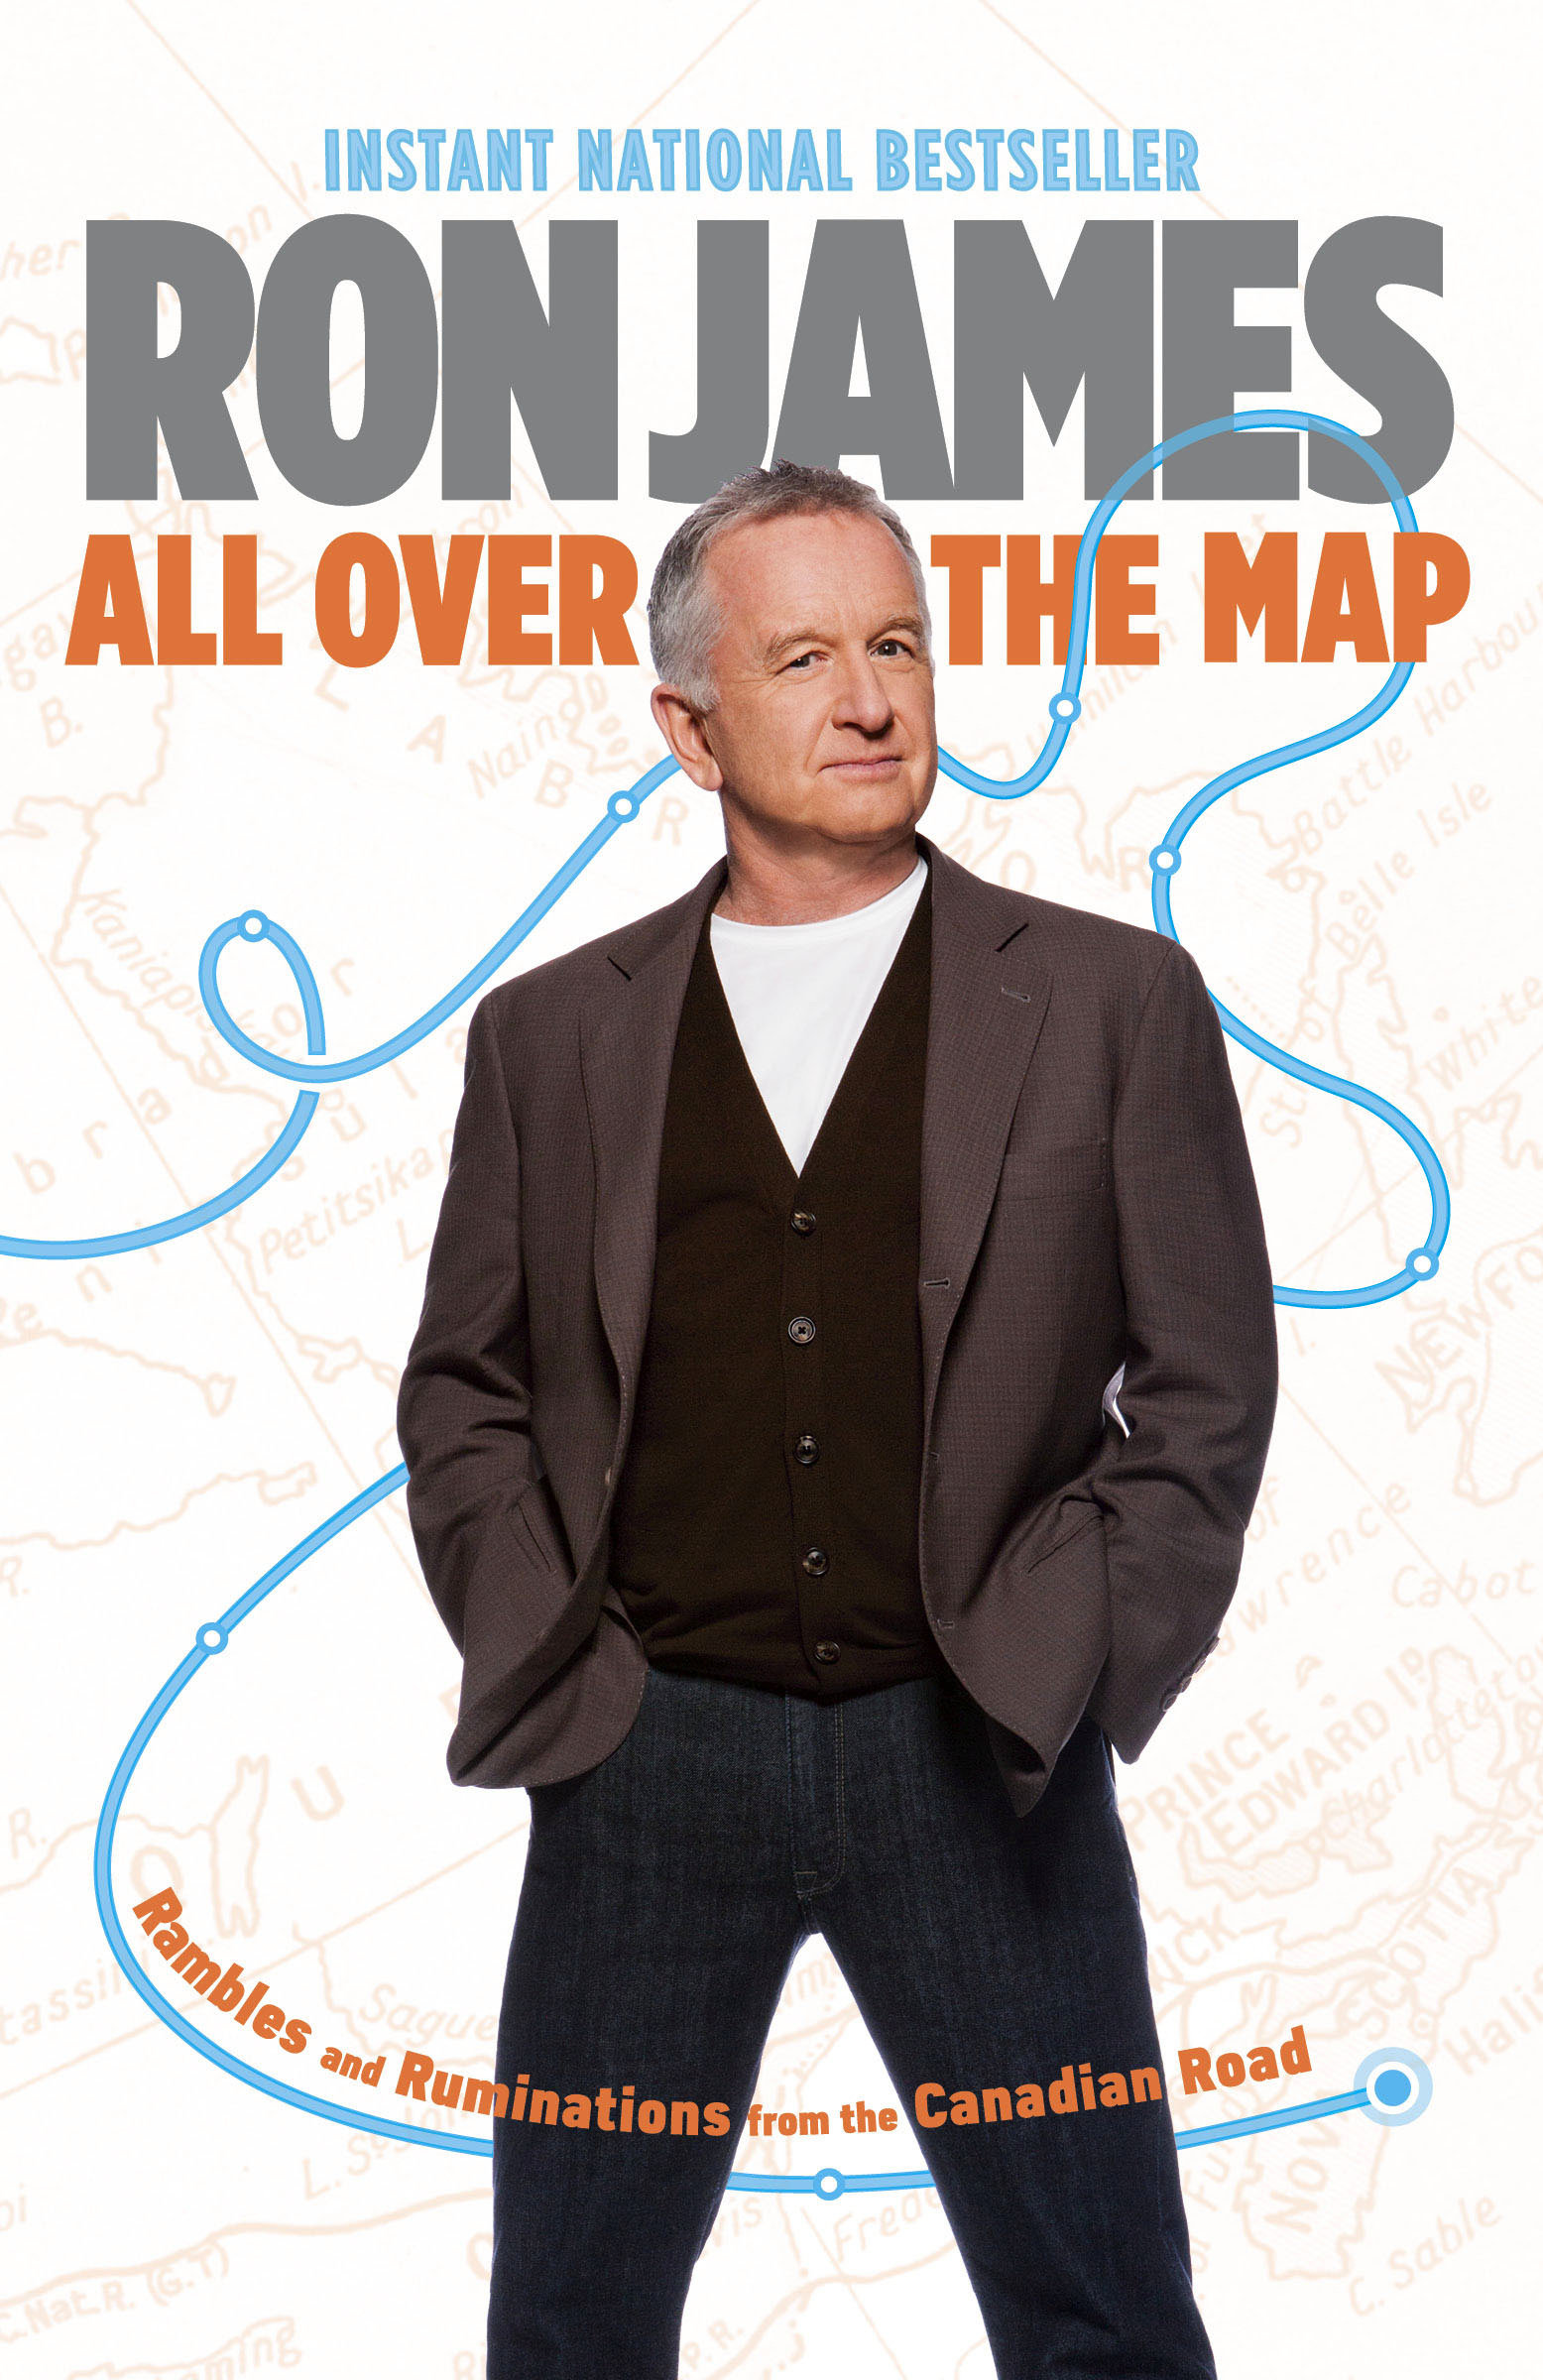 All Over the Map by Ron James